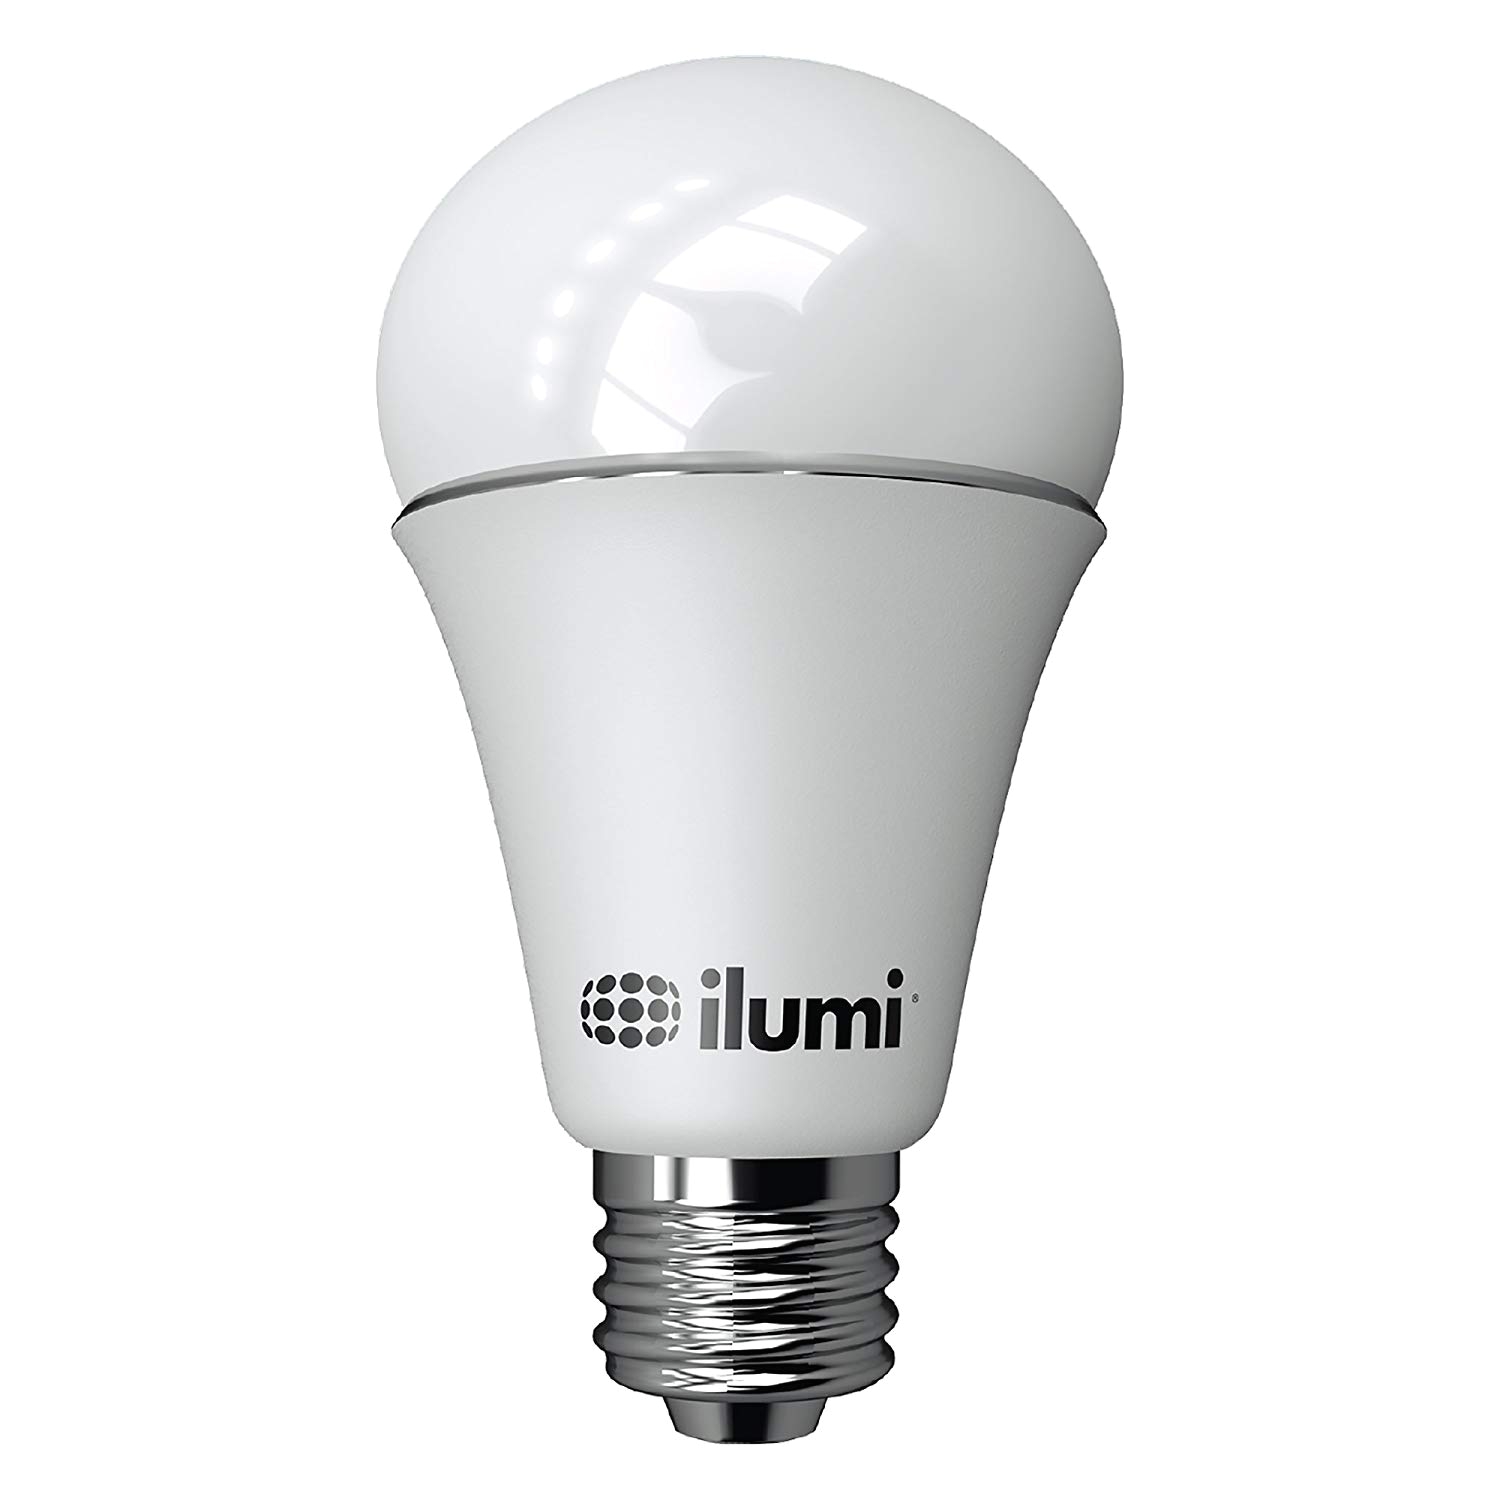 ilumi bluetooth smart led a19 light bulb 2nd generation smartphone controlled dimmable multicolored color changing light works with iphone ipad